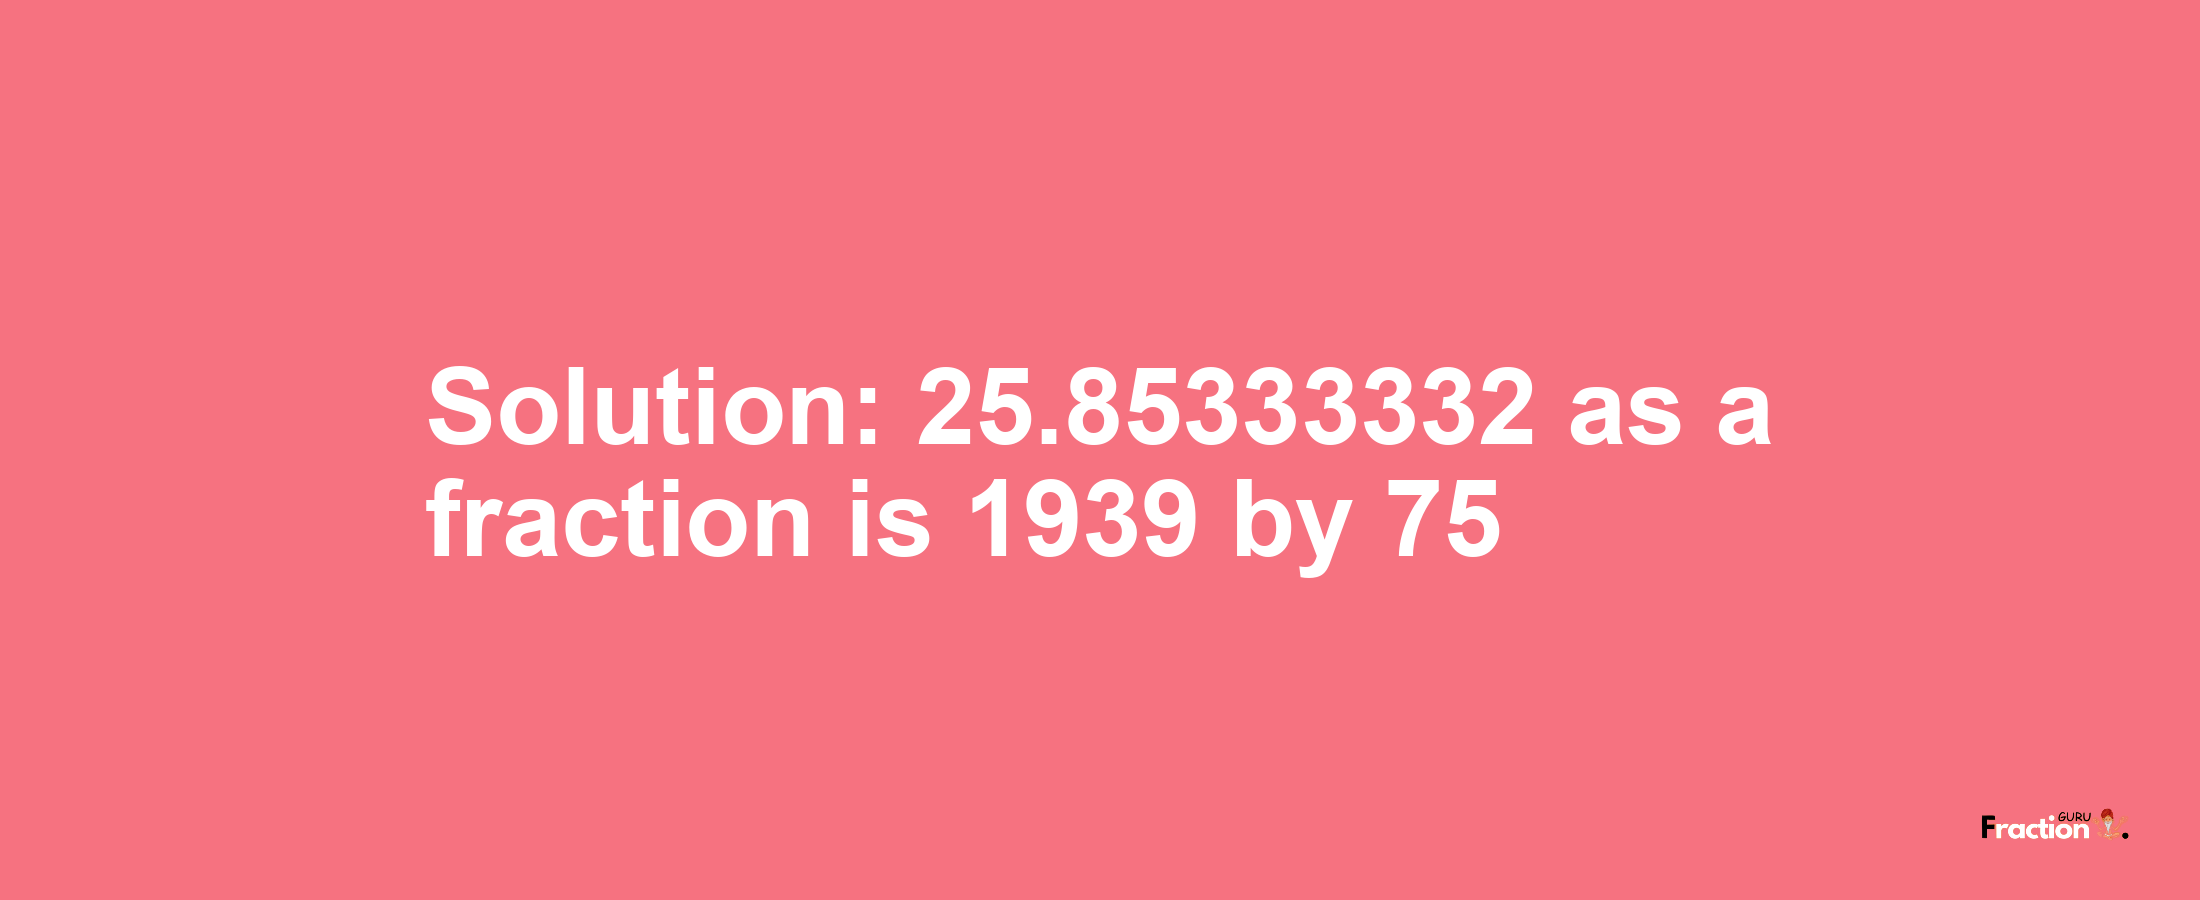 Solution:25.85333332 as a fraction is 1939/75